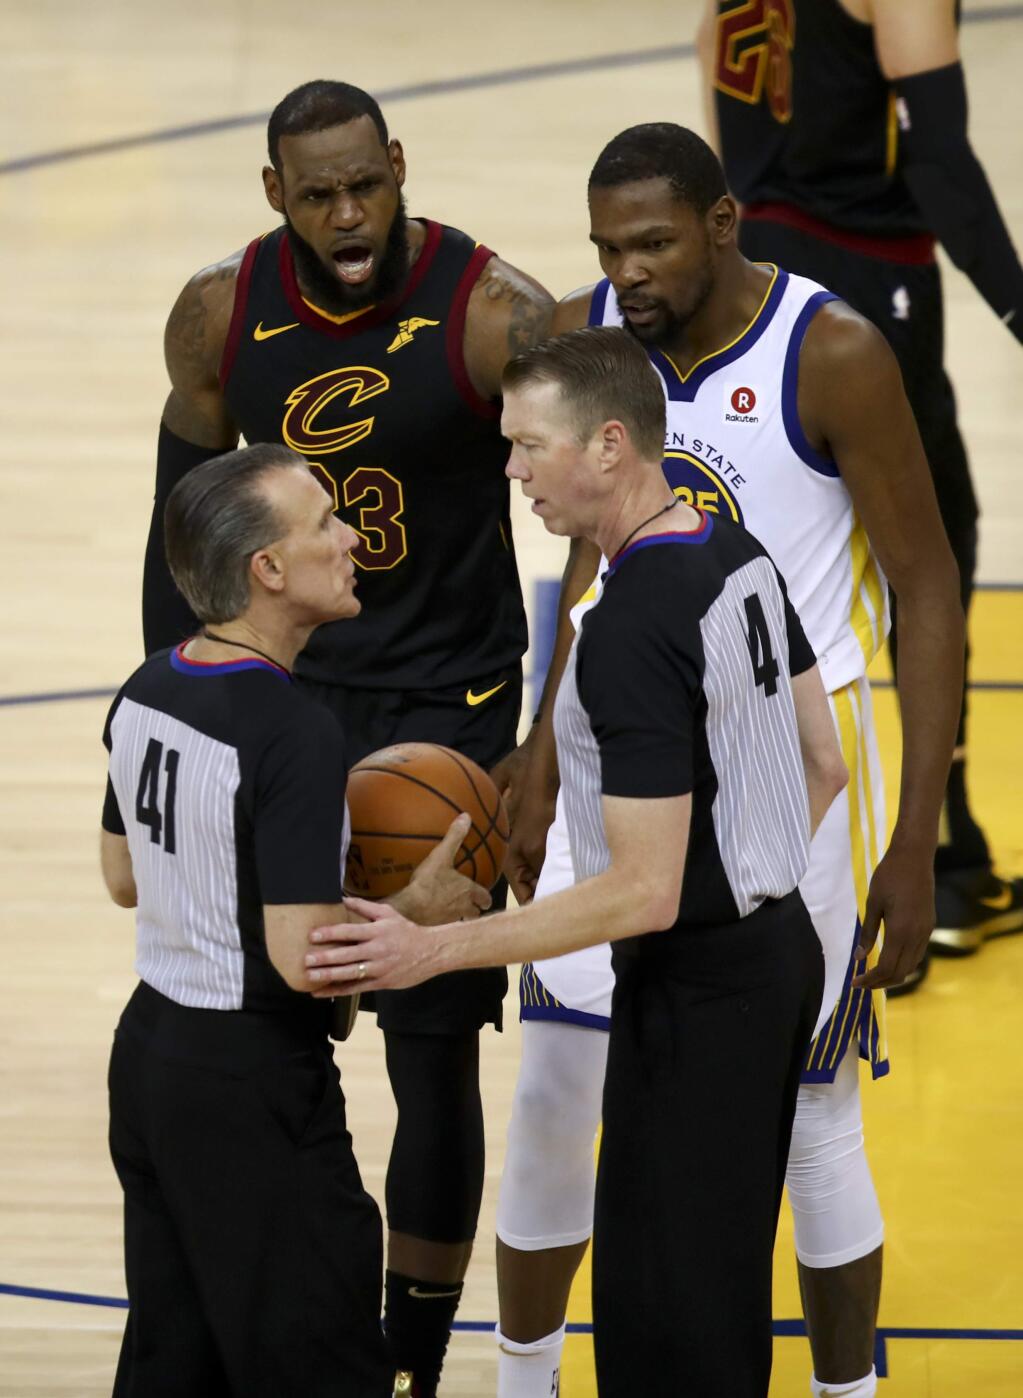 Cleveland Cavaliers forward LeBron James, top left, and Golden State Warriors forward Kevin Durant, top right, talk with officials during the second half of Game 1 of basketball's NBA Finals in Oakland, Calif., Thursday, May 31, 2018. (AP Photo/Ben Margot)